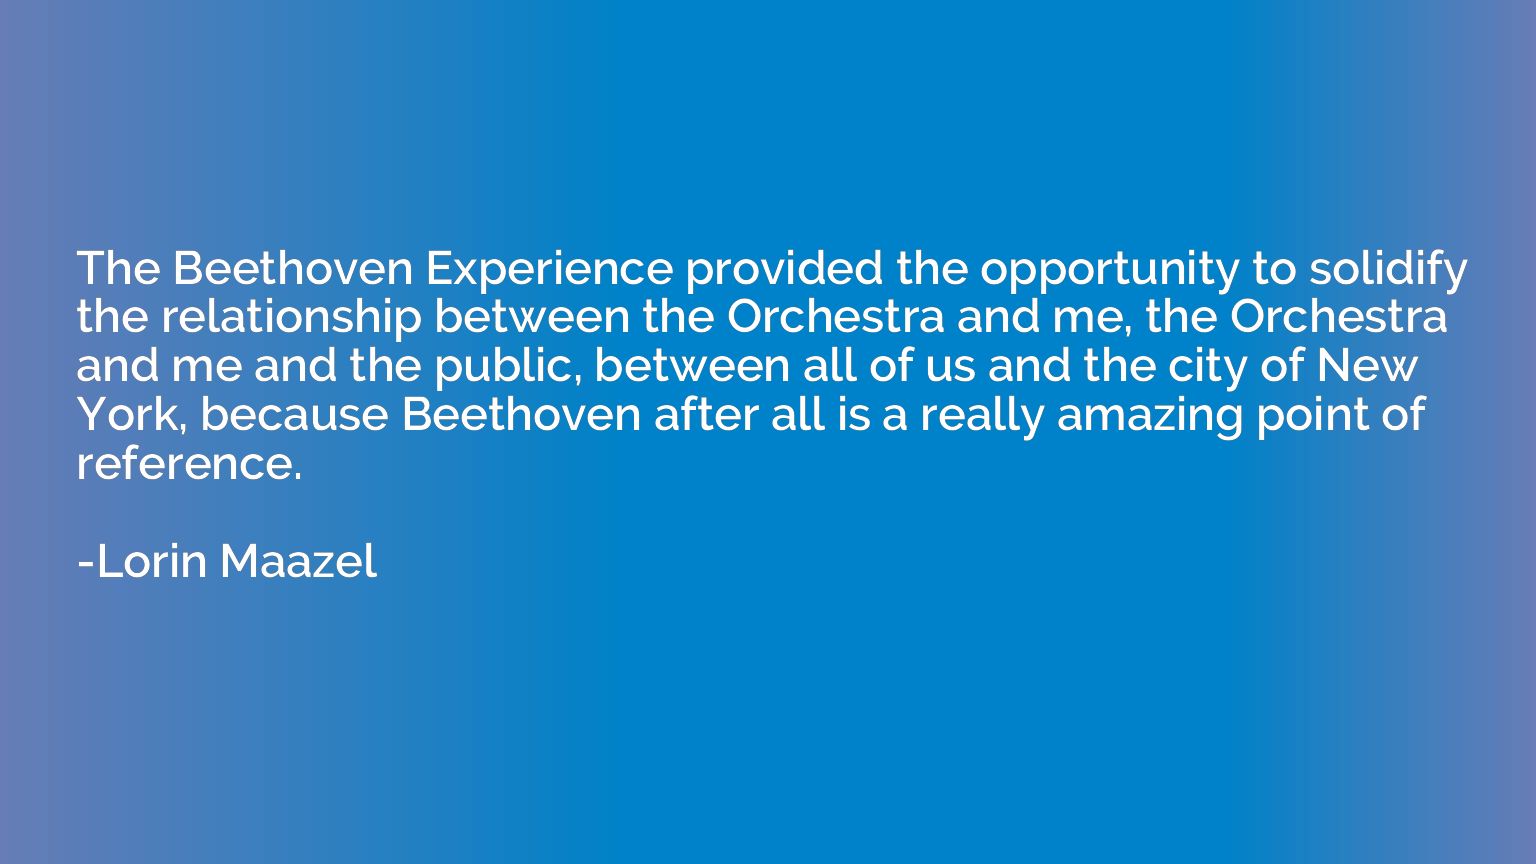 The Beethoven Experience provided the opportunity to solidif